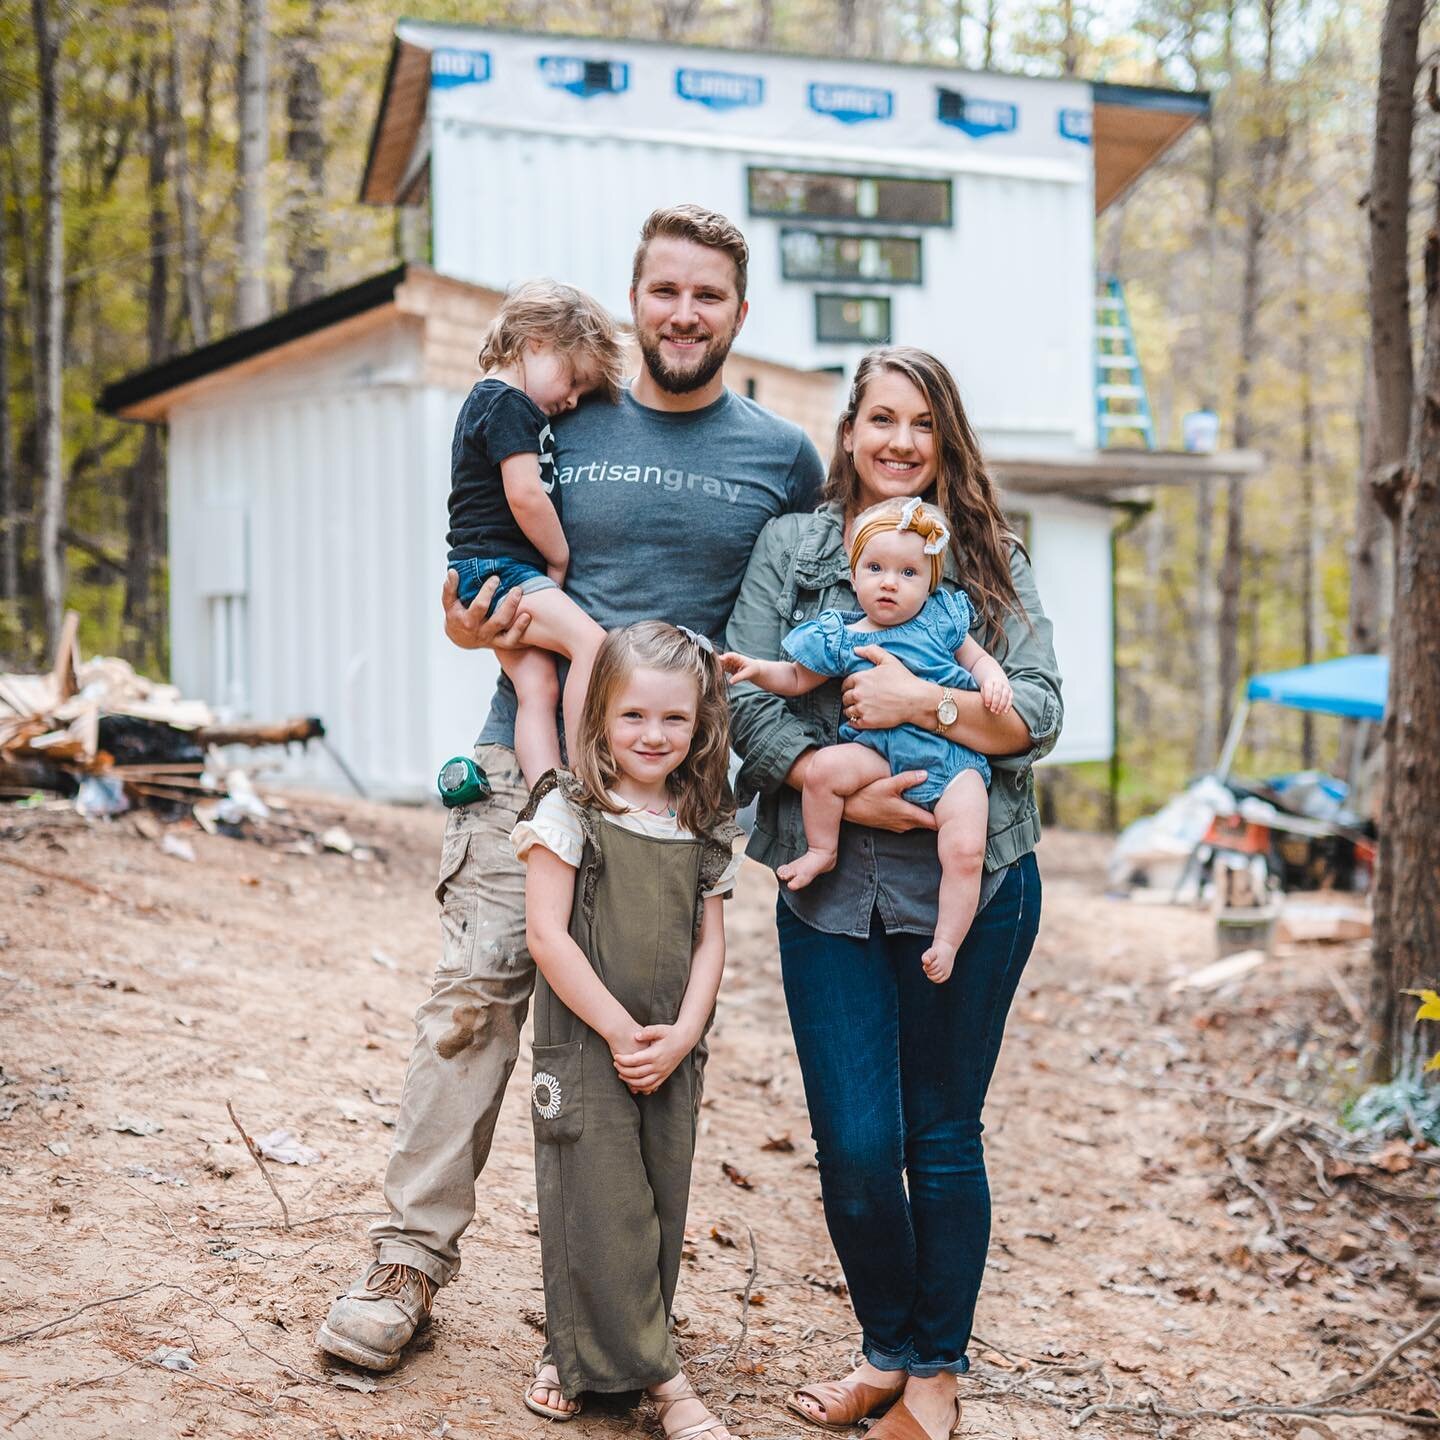 😱HOLY GIVEAWAY😱
This recent giveaway with @lifeincolumbus has introduced us to SOOOOO many new faces! 
We are Emily, Seth, Mina (5), Emery (4), &amp; Estelle (1)👋👋👋👋👋
We have spent the last two years working on our dream in Hocking Hills, Ohio